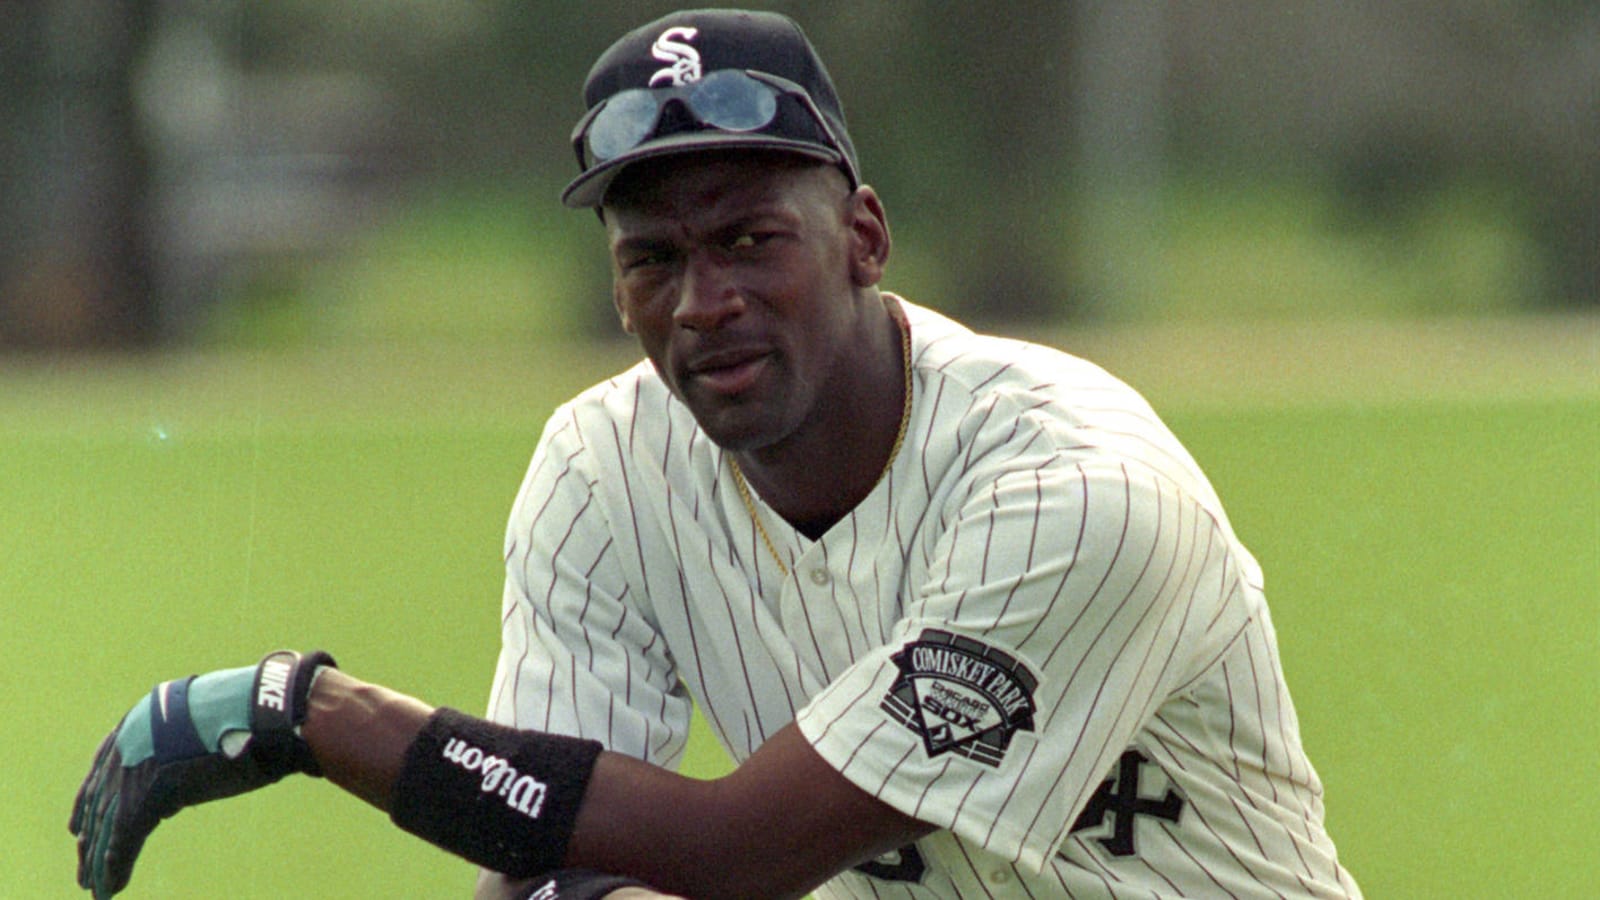 Minor league baseball teammate weighs in on if Michael Jordan could have made majors